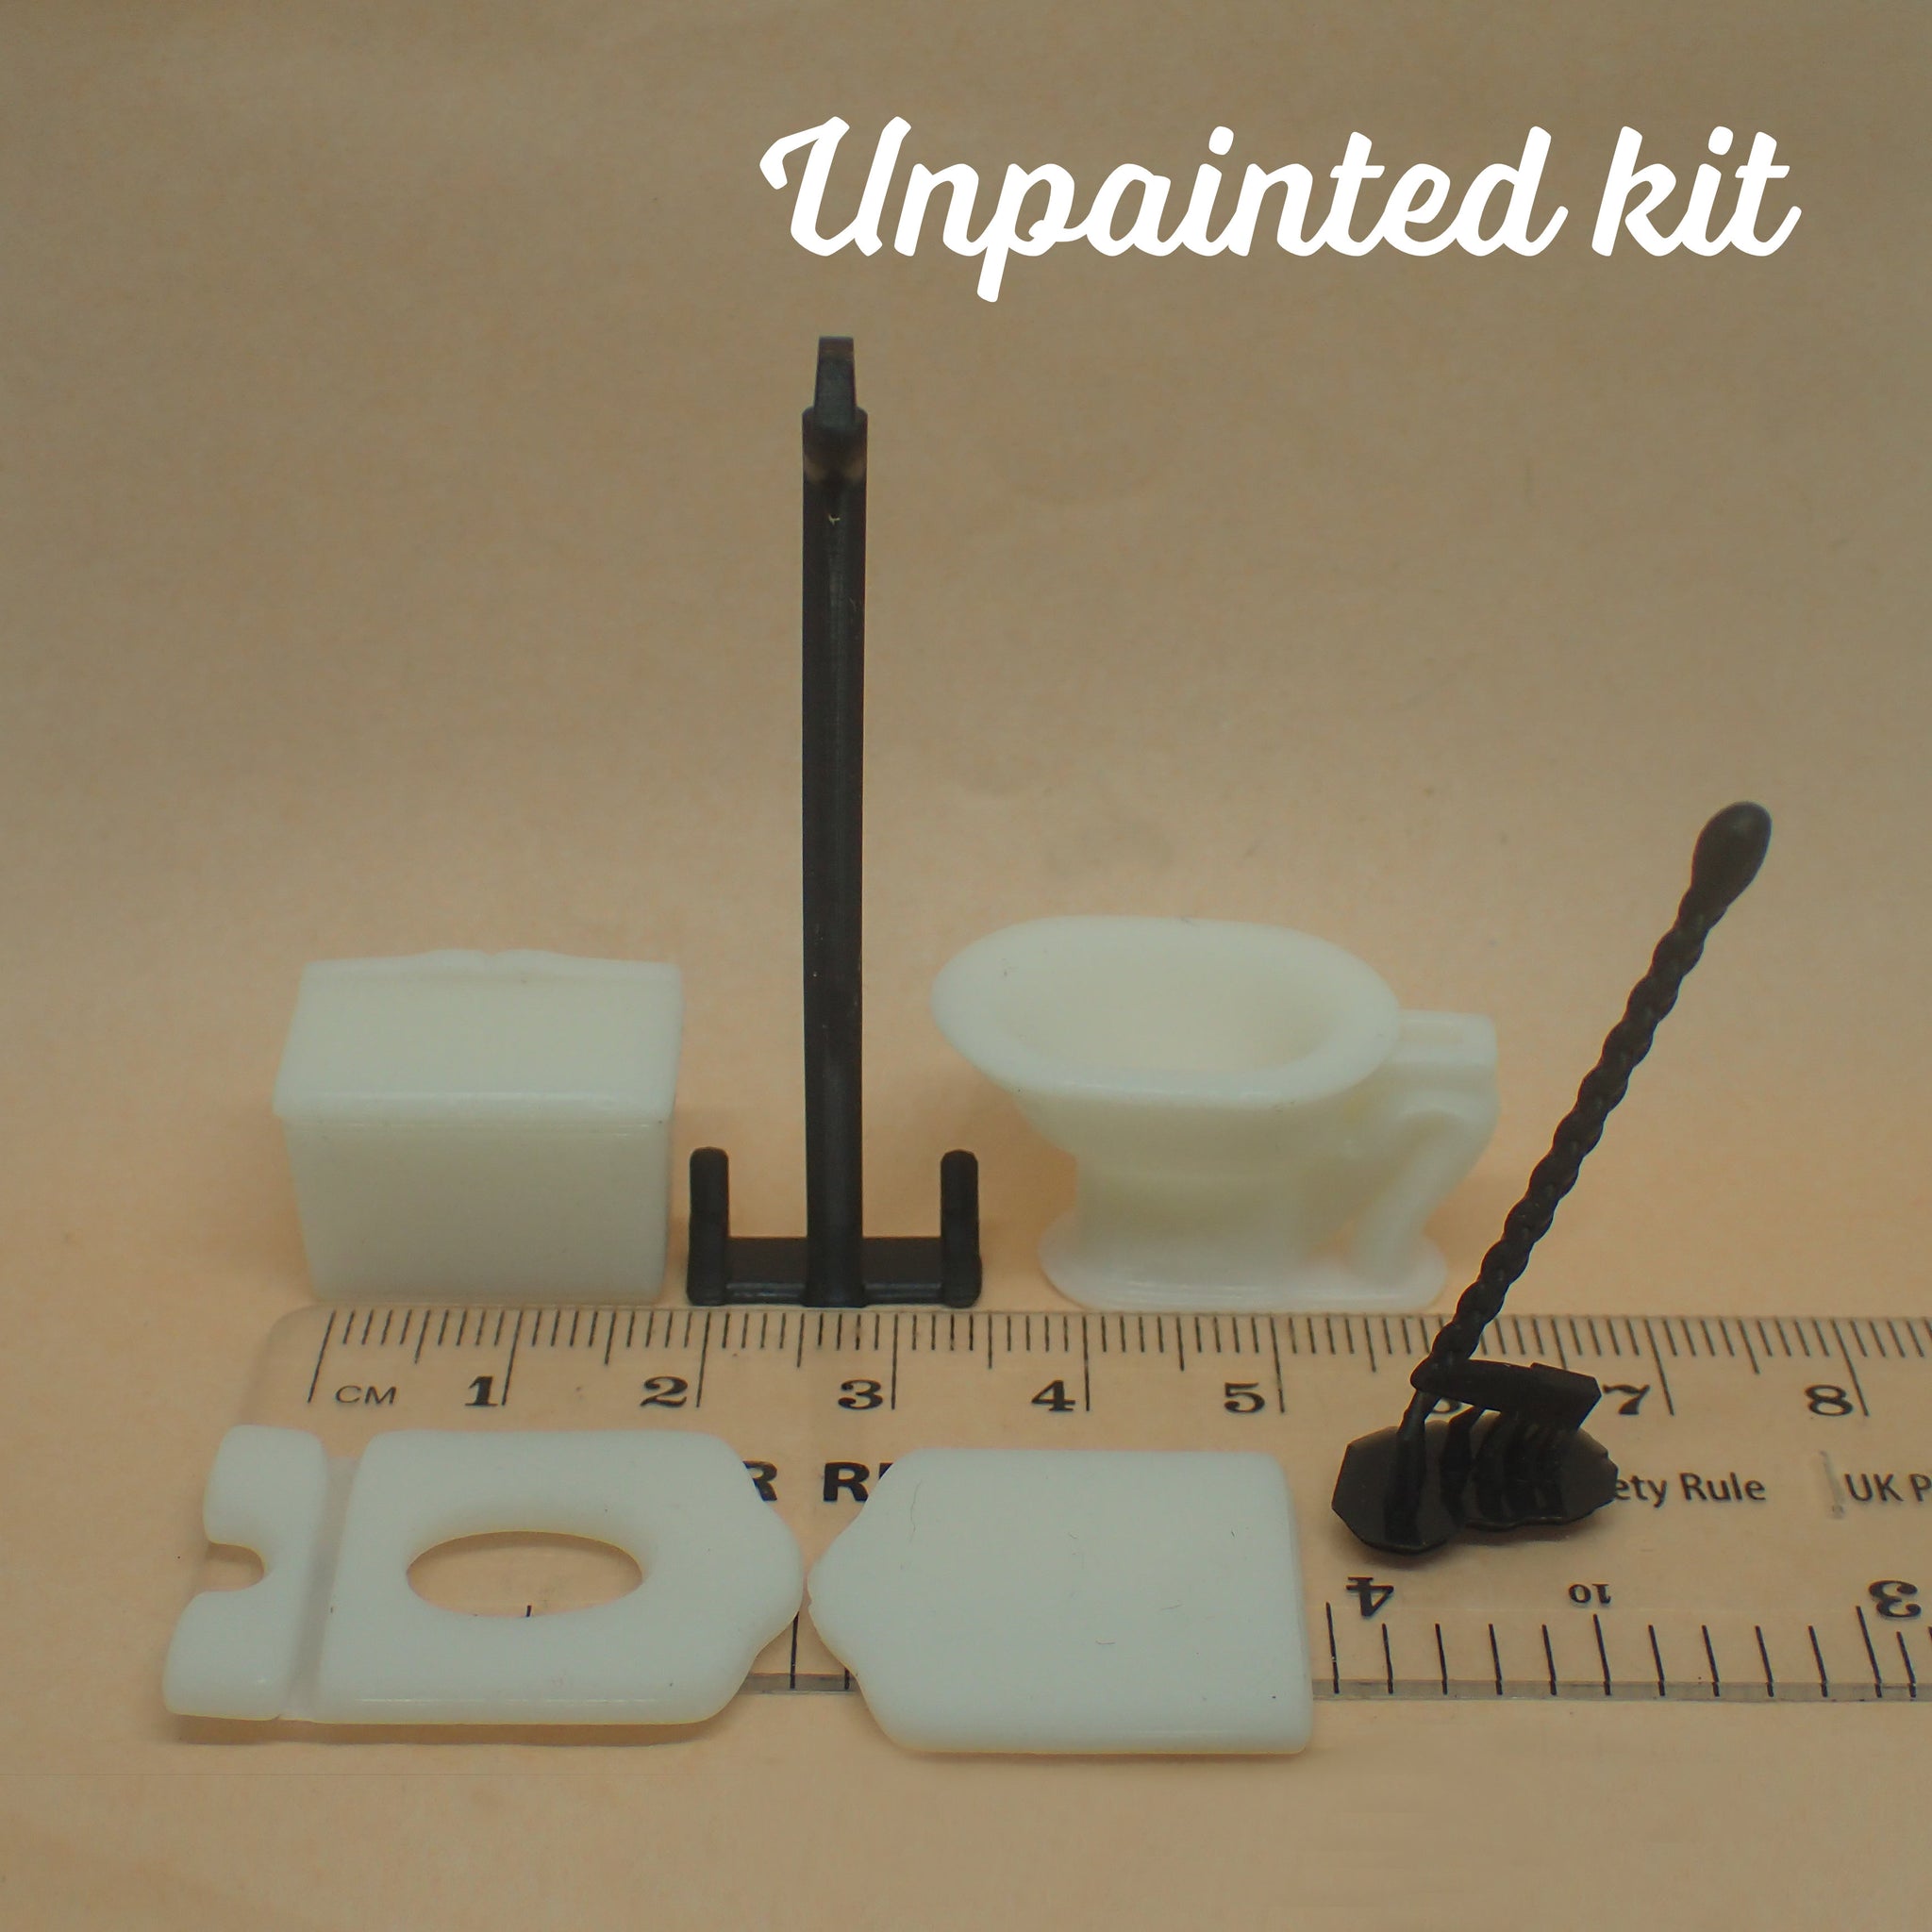 Traditional high cistern toilet KIT, 1/24th scale